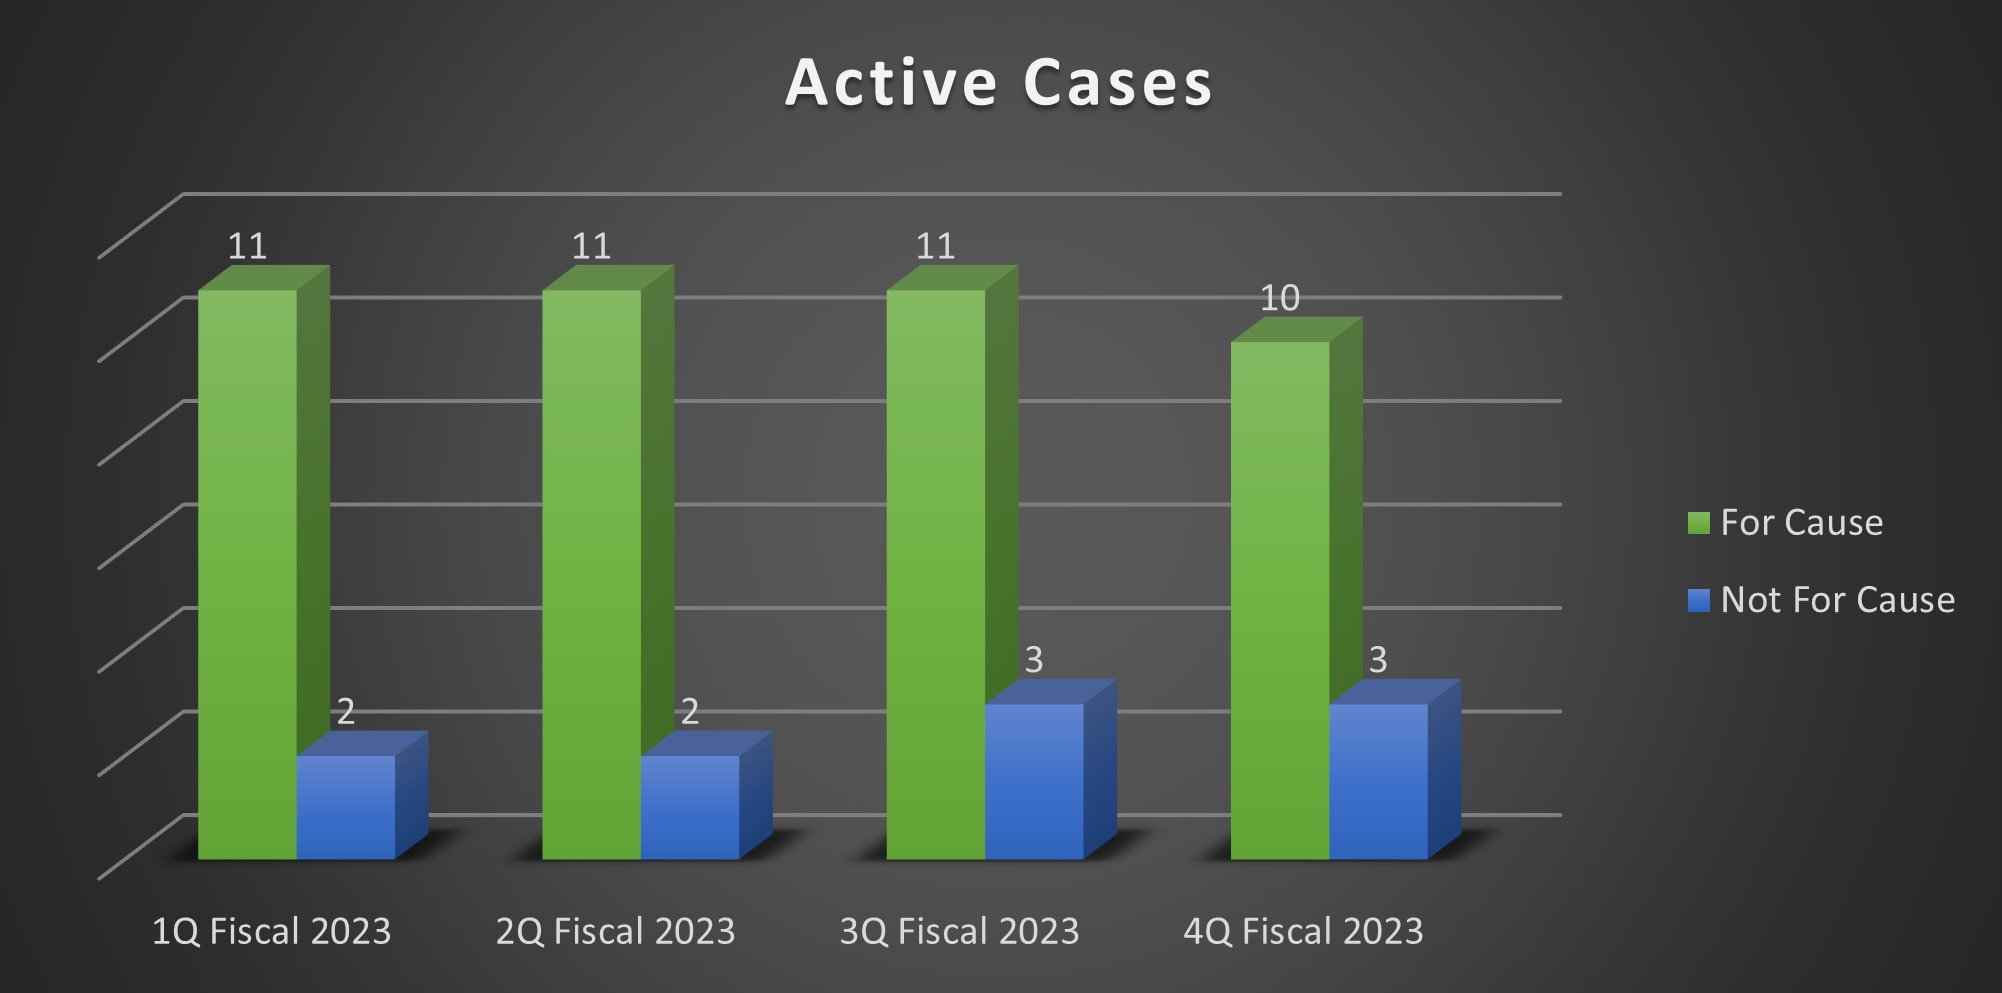 Q4 2023 Active Cases by Type